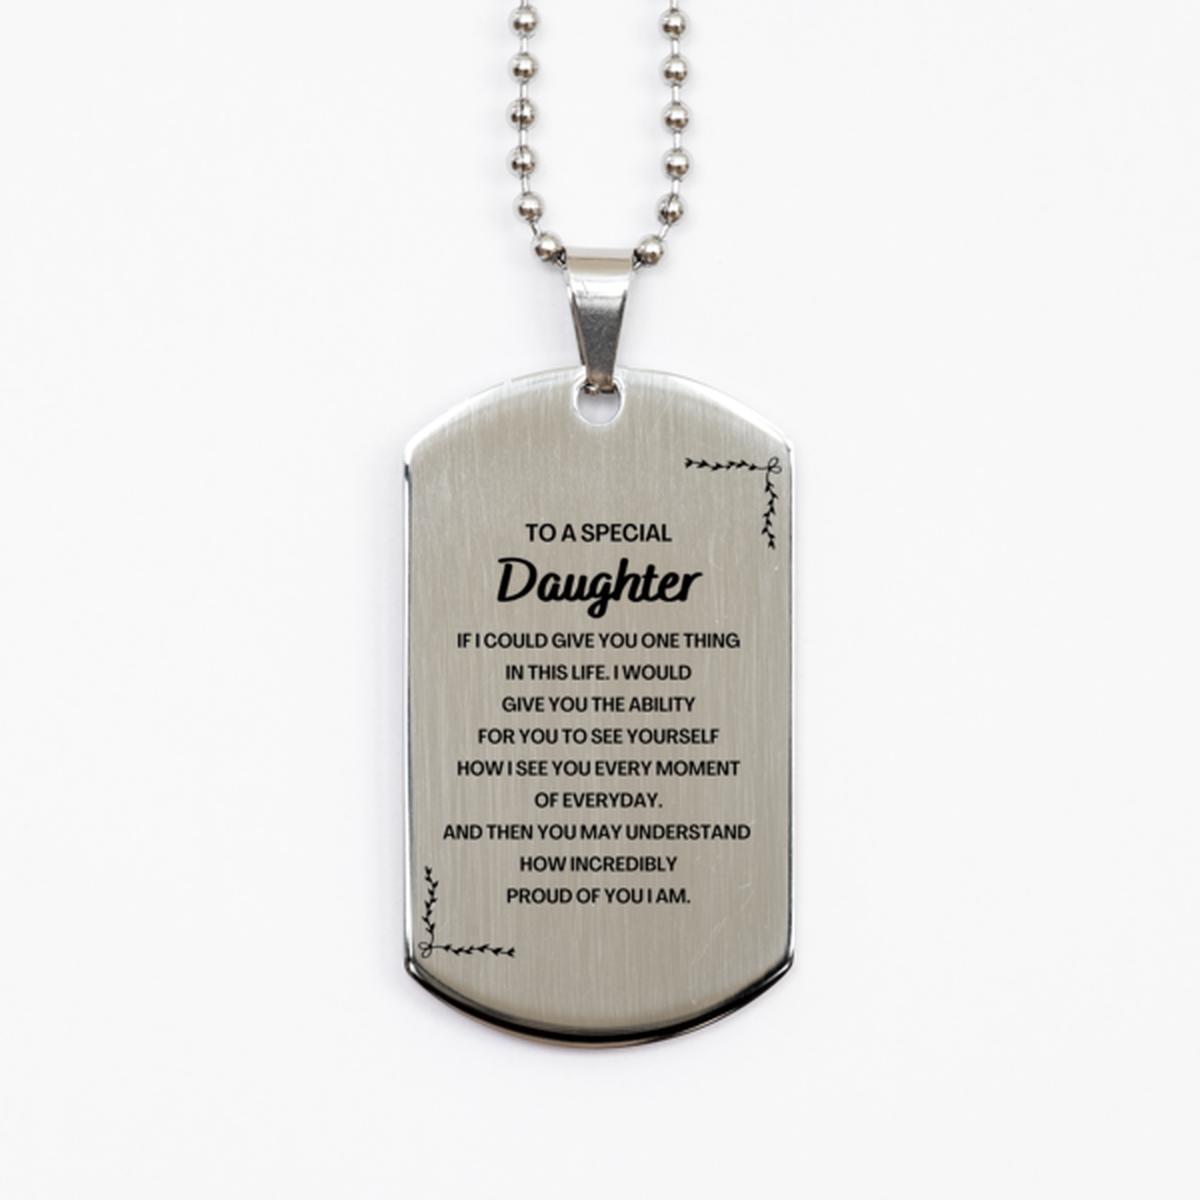 To My Daughter Silver Dog Tag, Gifts For Daughter Engraved, Inspirational Gifts for Christmas Birthday, Epic Gifts for Daughter To A Special Daughter how incredibly proud of you I am